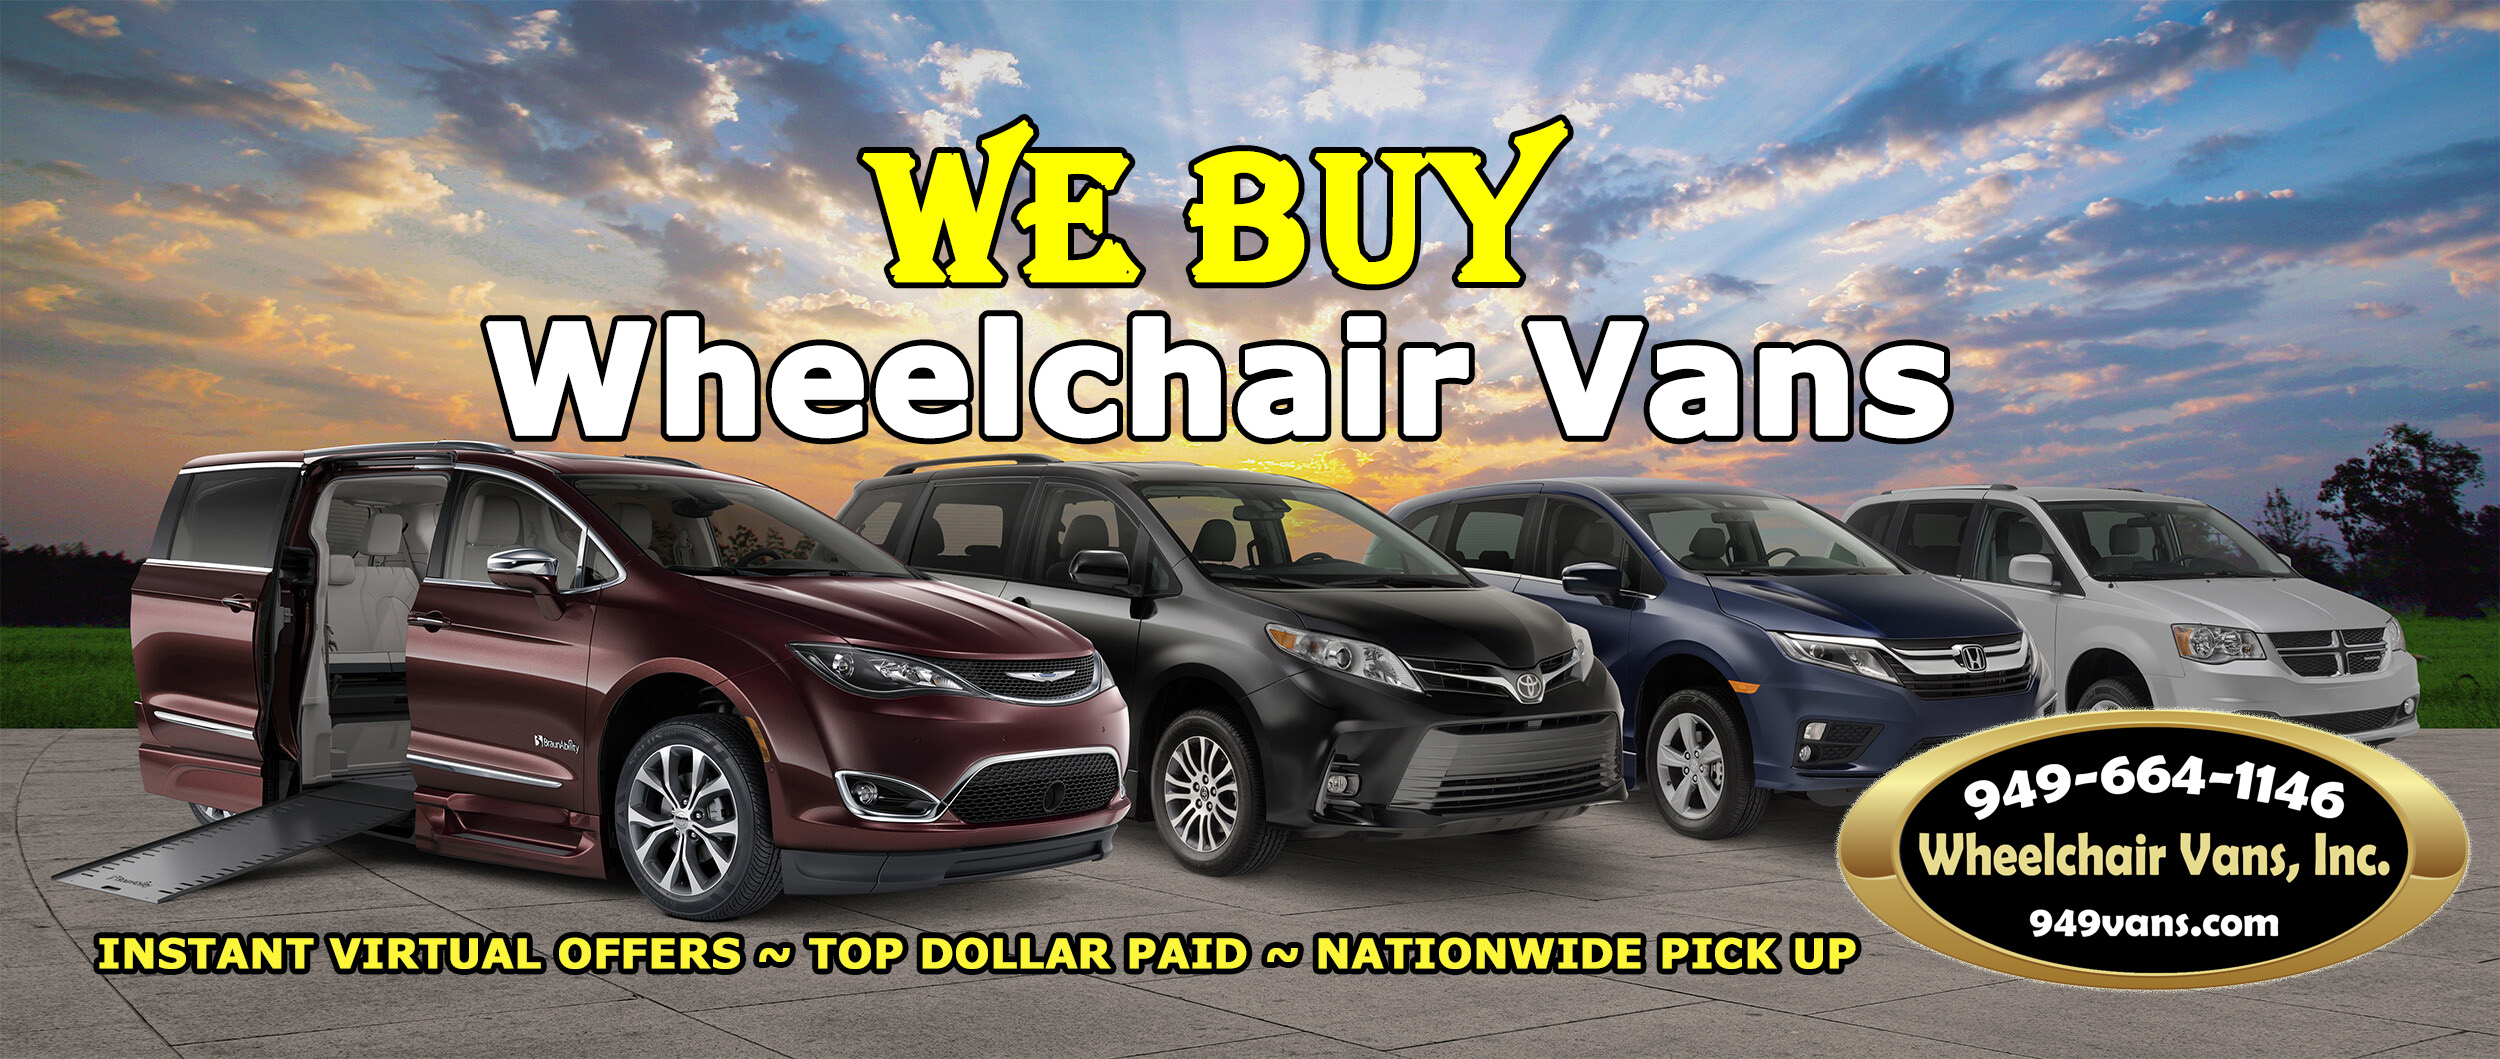 WE ARE LOOKING TO BUY YOUR VEHICLE. Sell us your wheelchair van